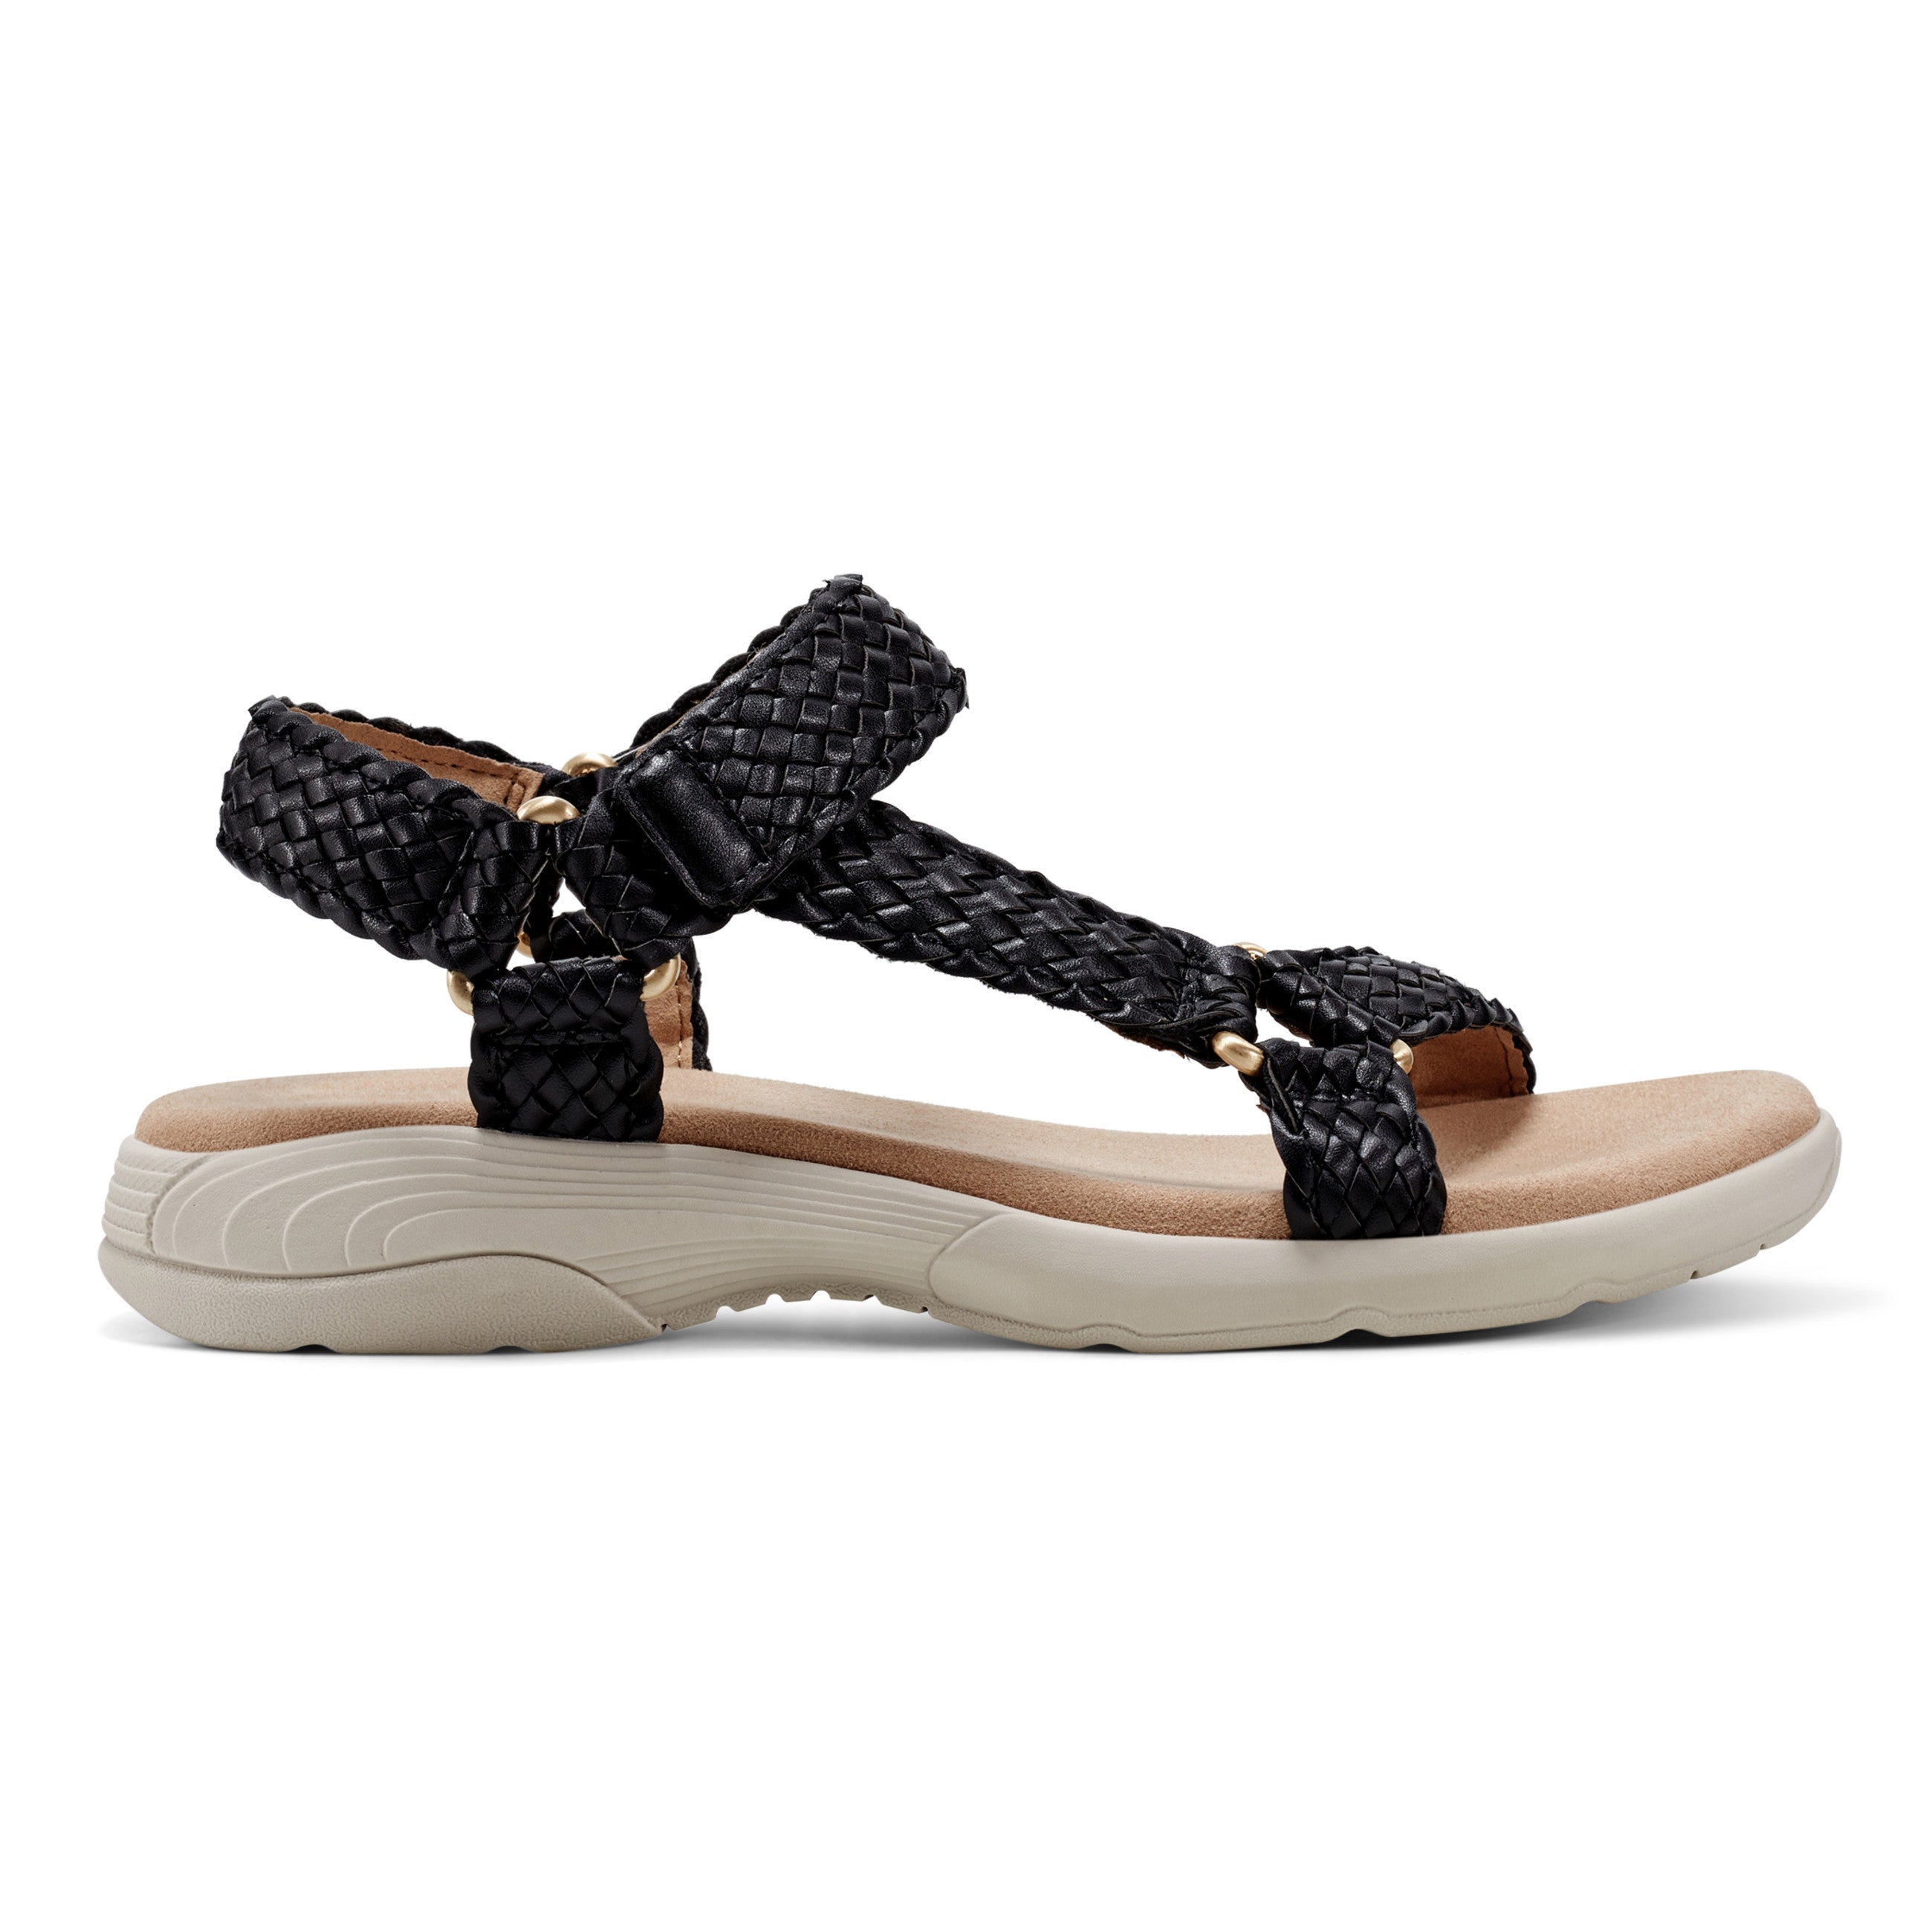 Taytum Round Toe Strappy Casual Sandals